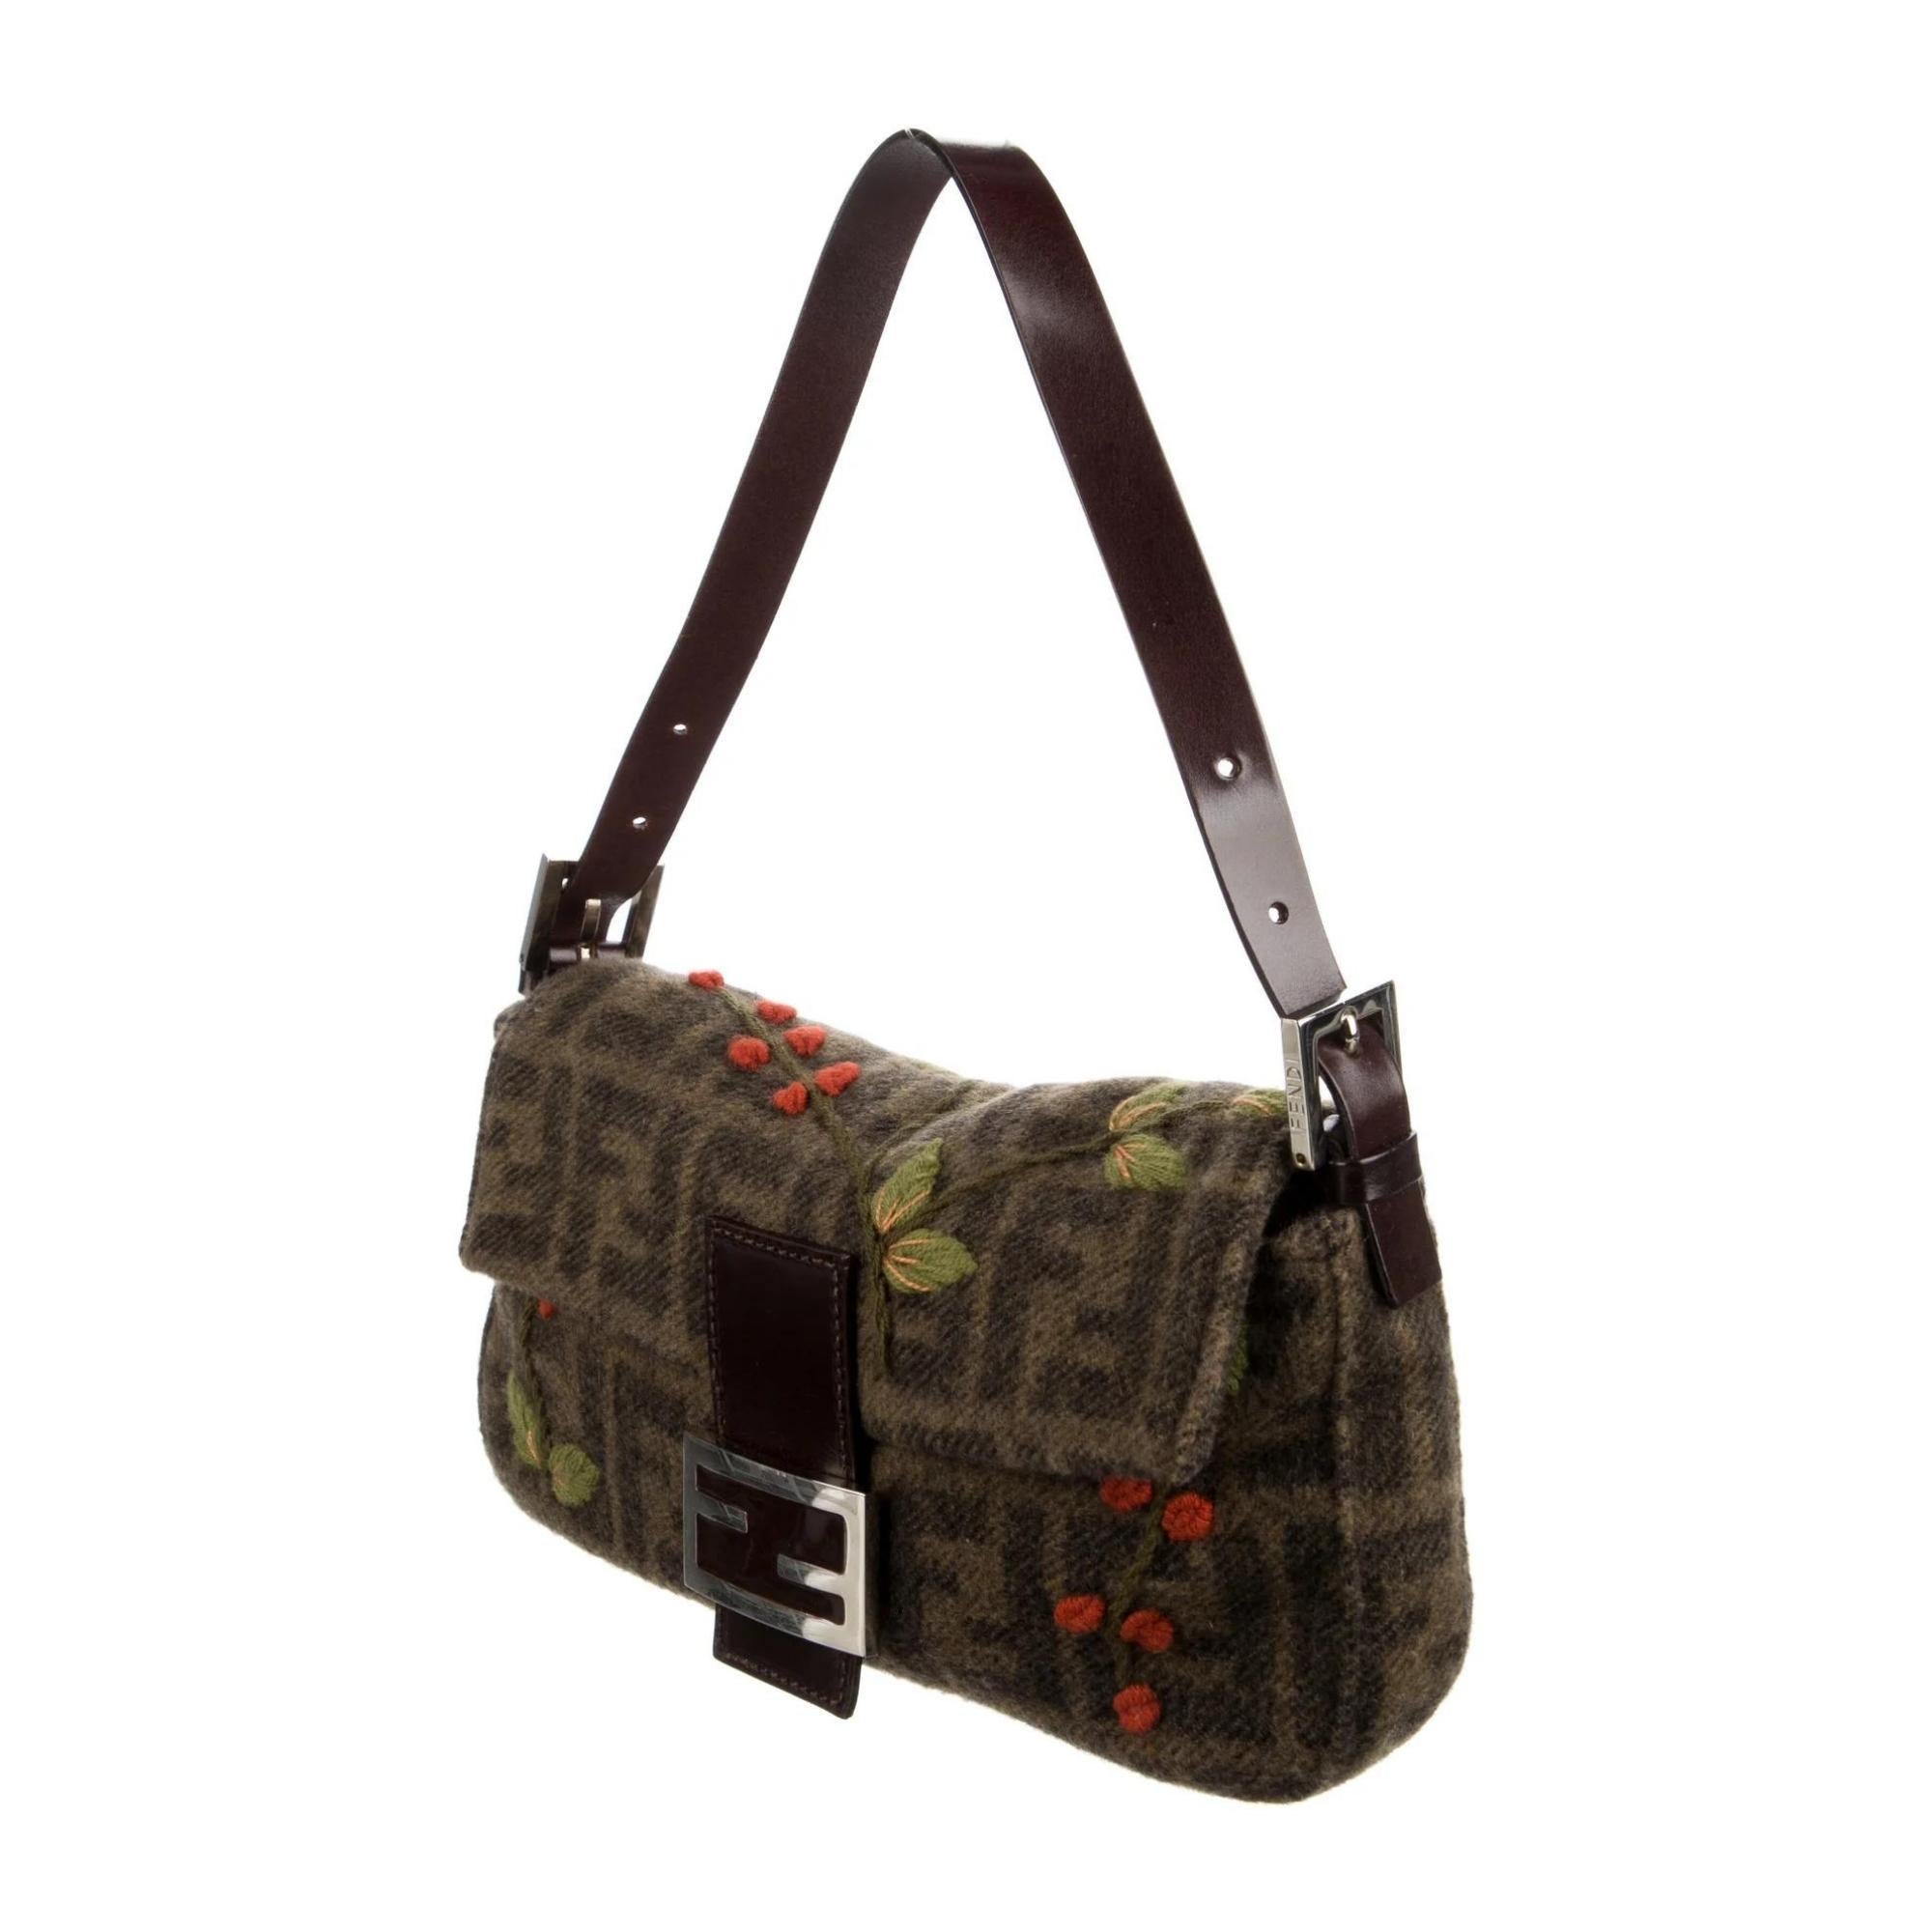 This vintage Fendi shoulder bag is made with wool and cashmere blend in brown. The bag features a printed monogram zucca FF logo throughout, flower embroidery, silver-tone hardware, a single flat leather shoulder strap, a front flap with snap